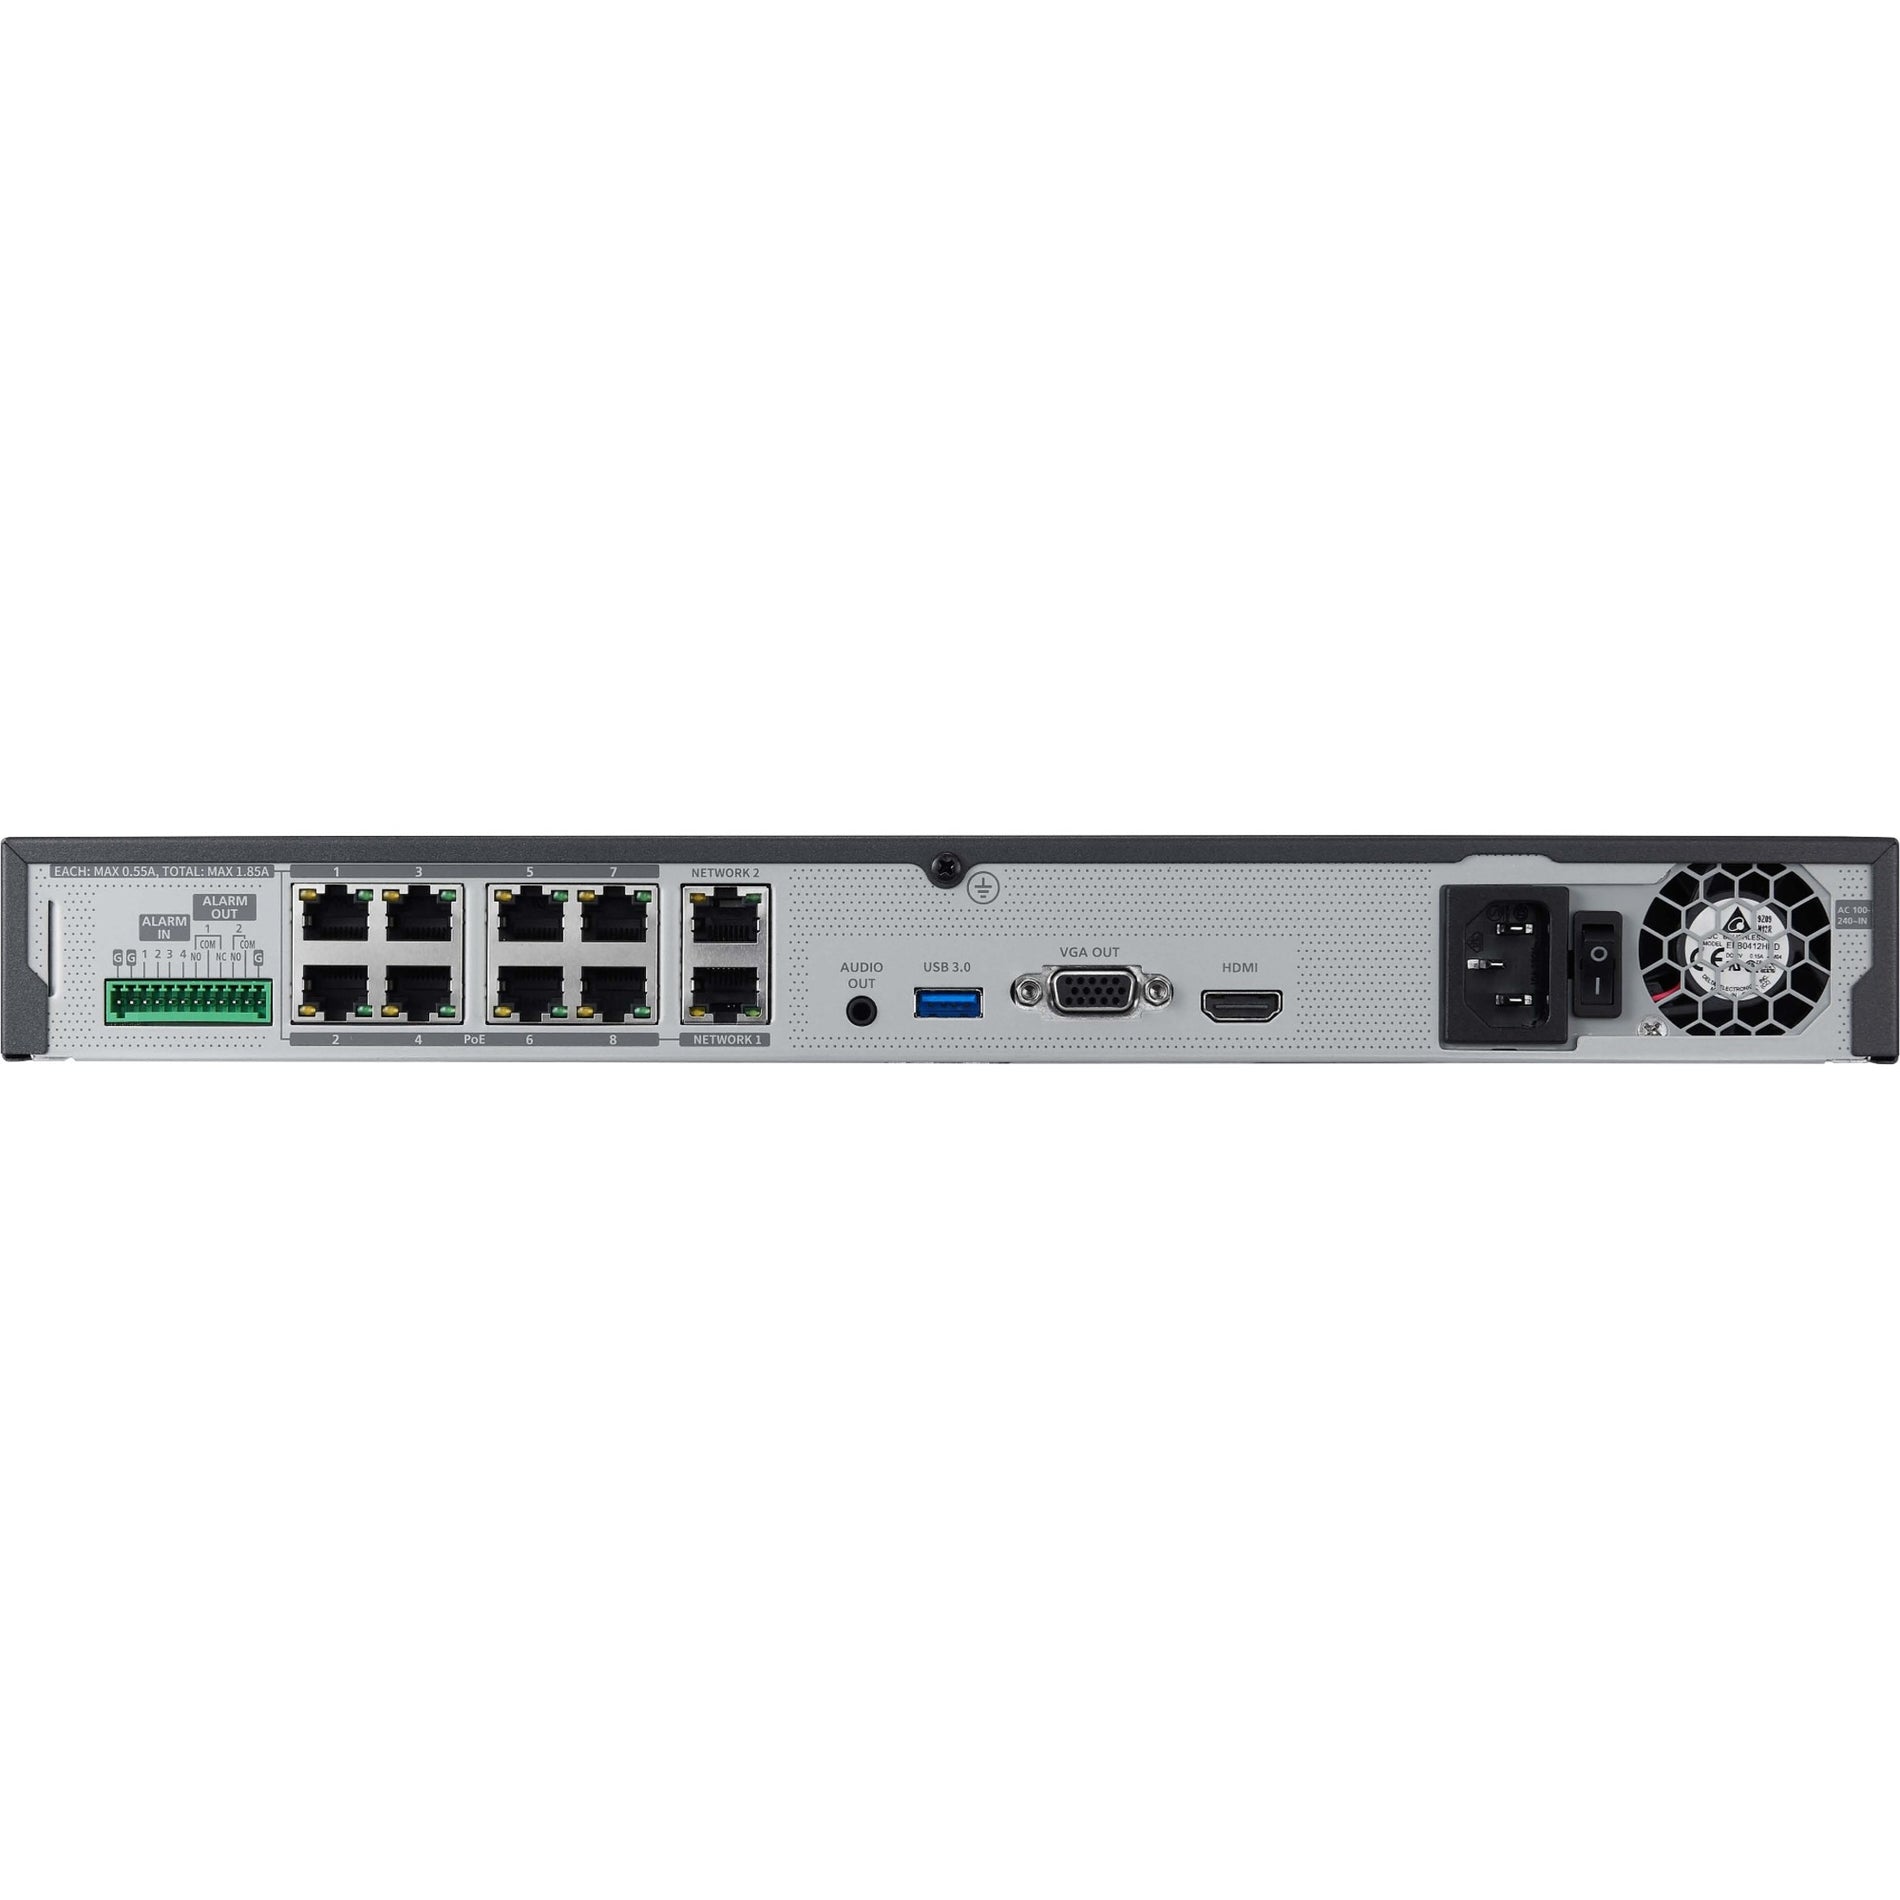 Wisenet WRN-810S-8TB WAVE Network Video Recorder, 8 TB HDD, NDAA Compliant, HDMI, USB, Remote Management